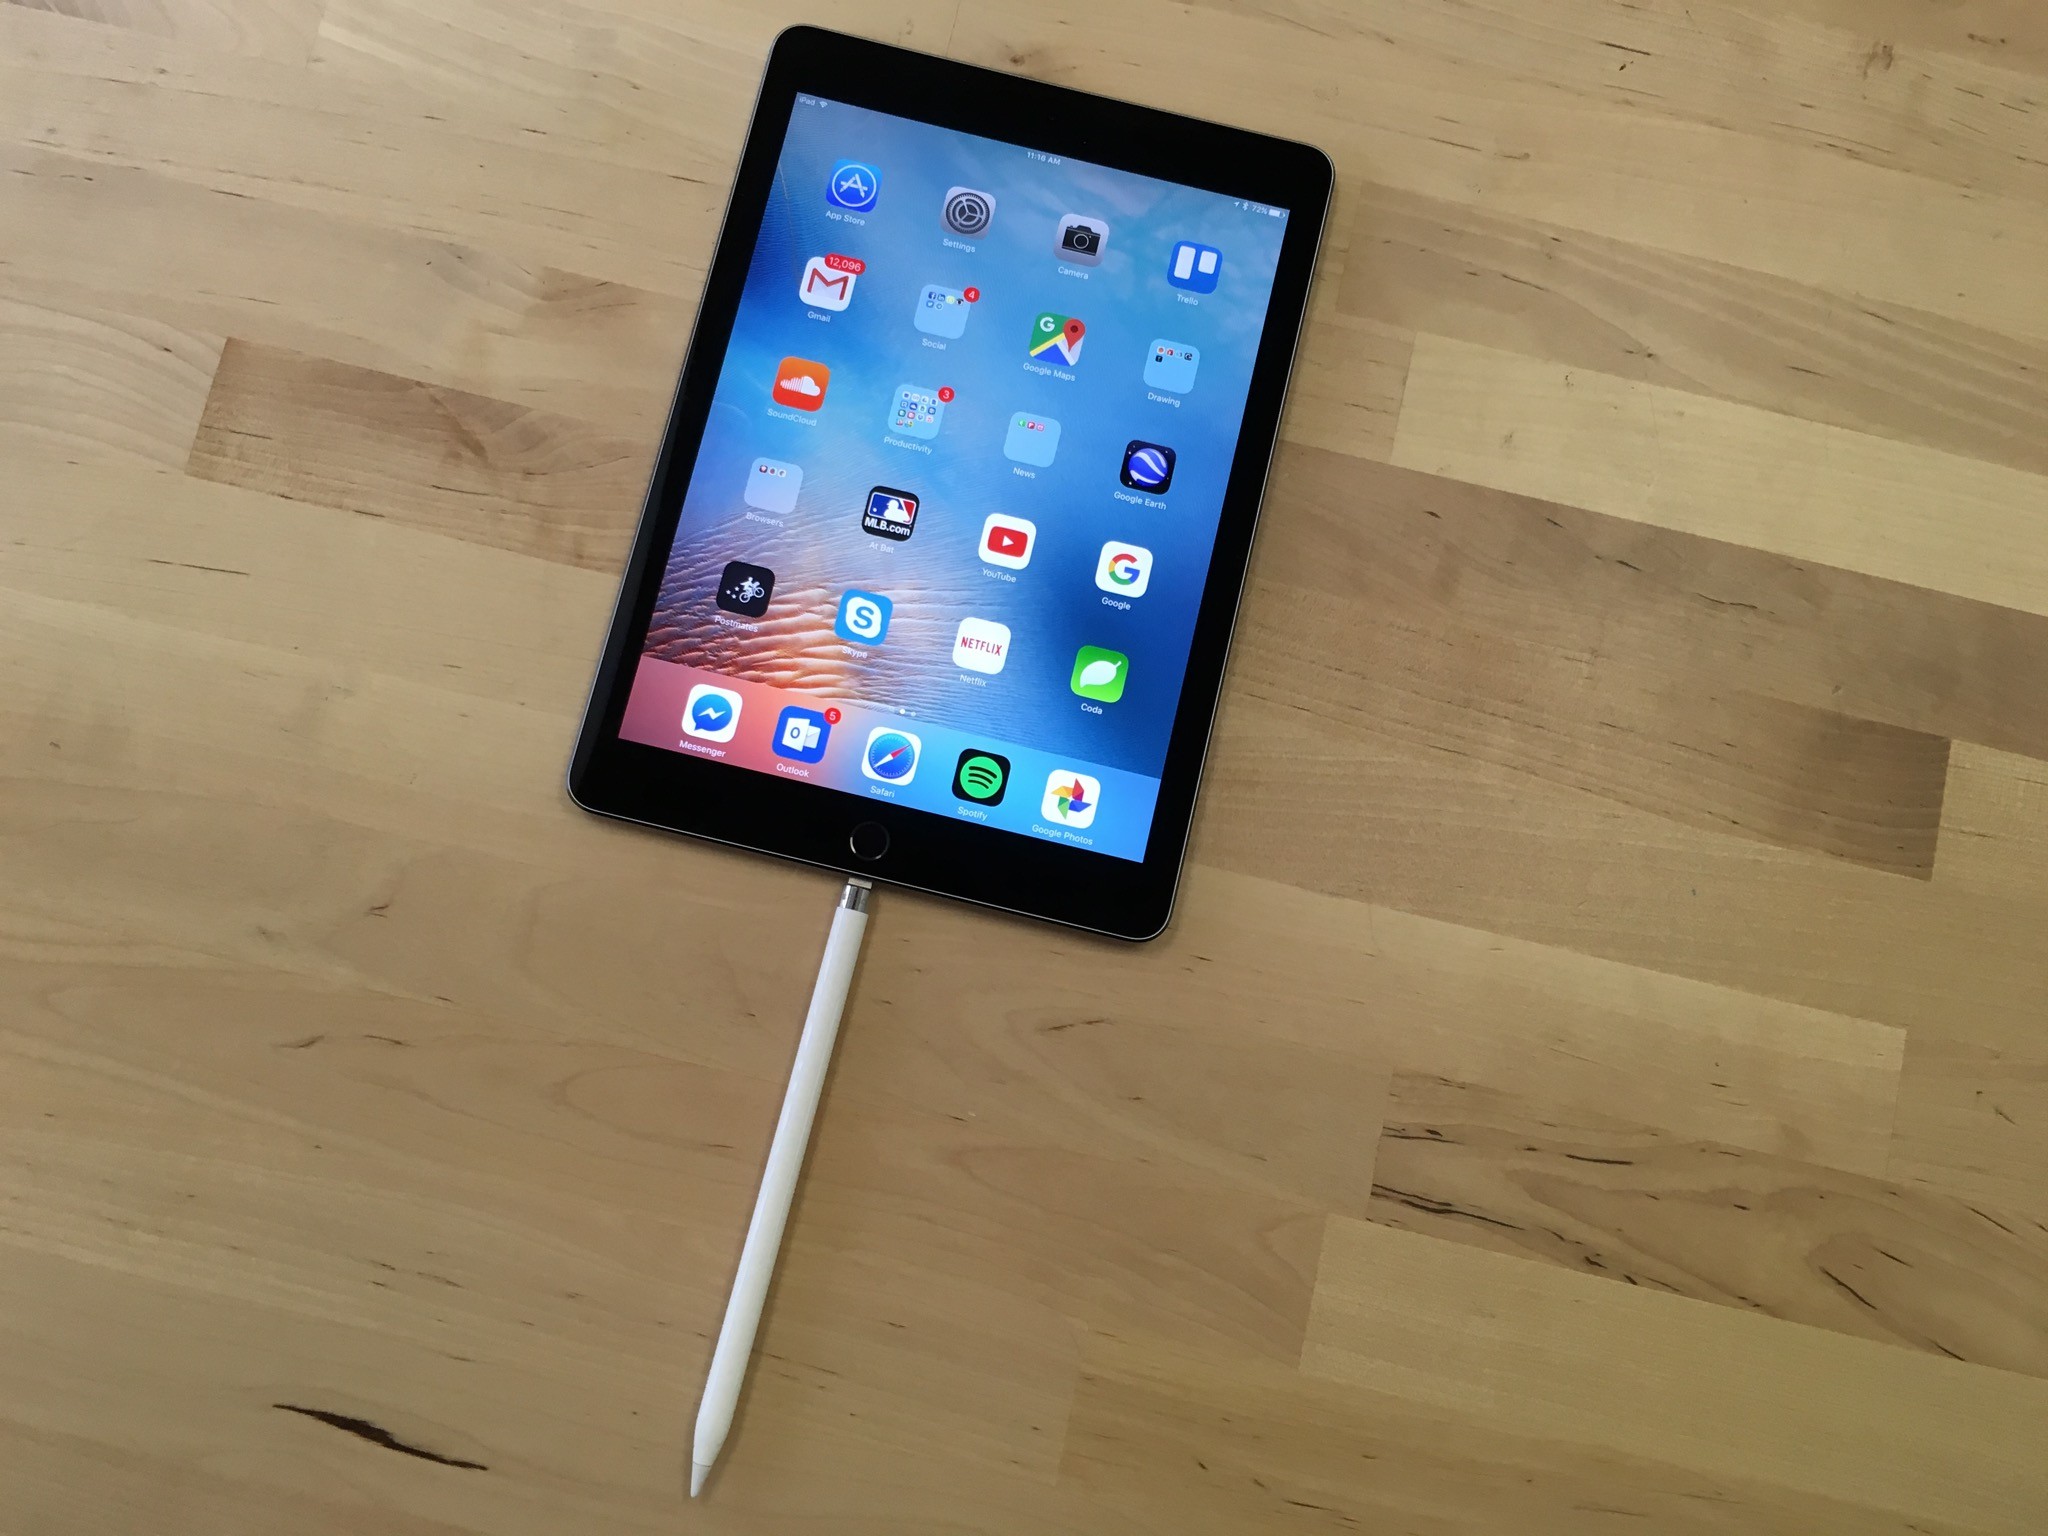 The odd lollipop shape you get when you're charging the Apple Pencil in the iPad Pro.